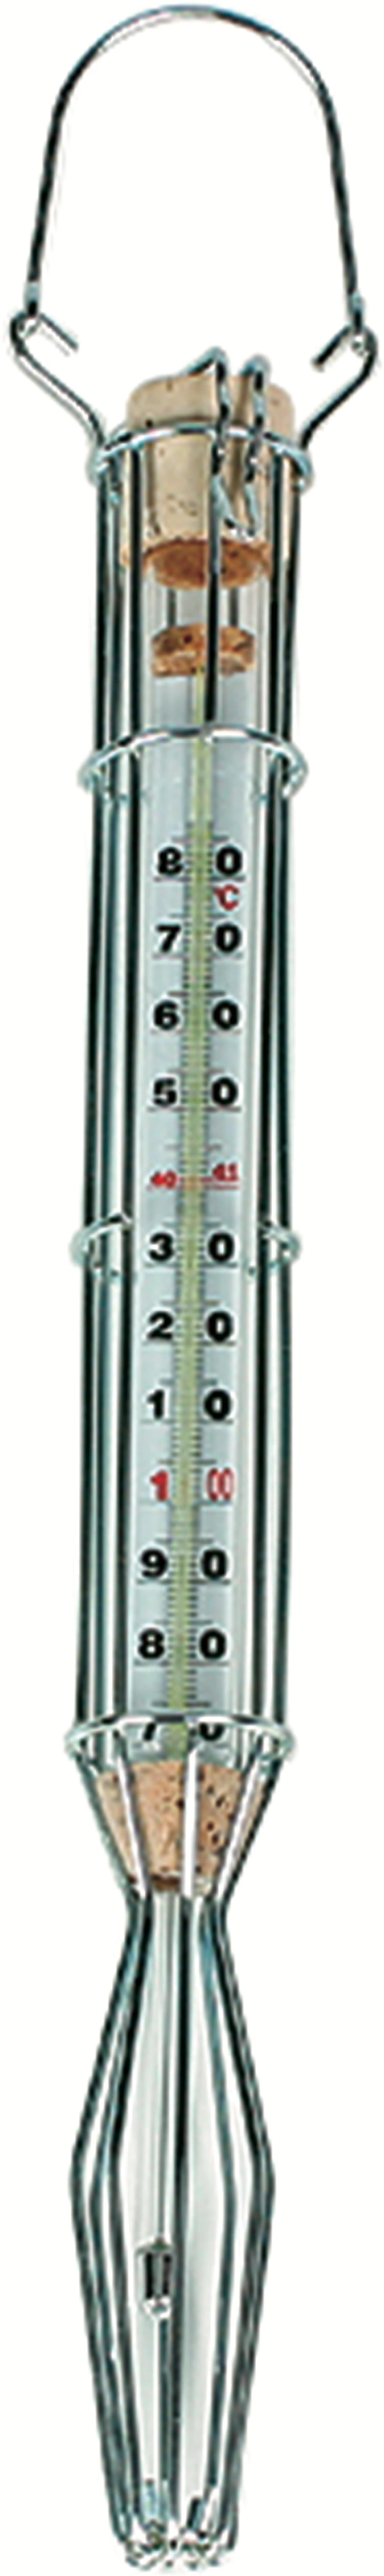 Thermometer 160002